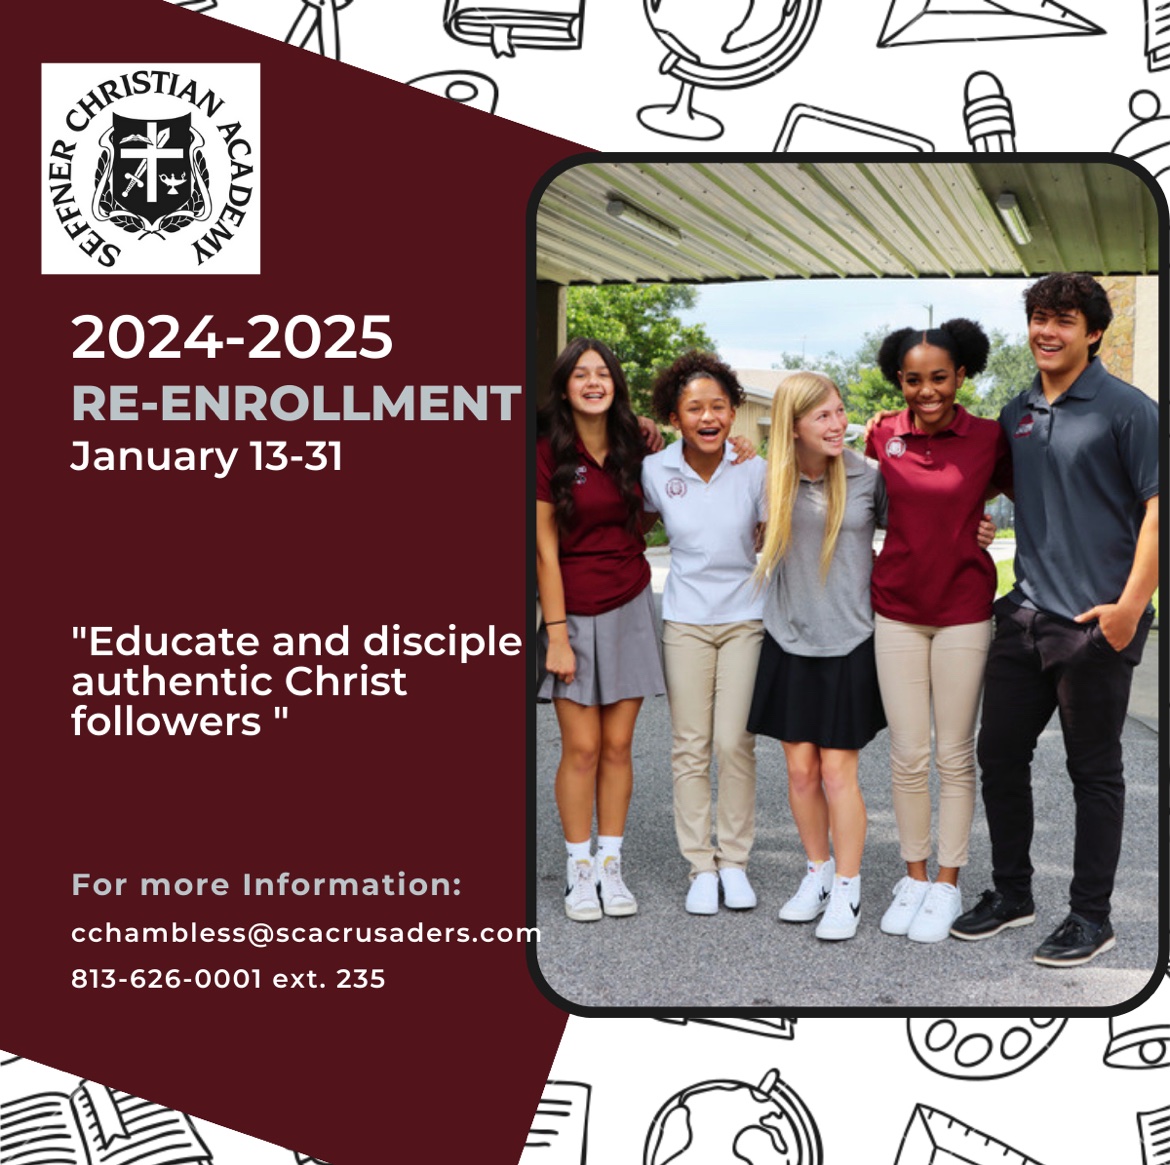 Mark your calendar! Re-enrollment for the 2024-2025 school year will be January 13-31. New student applications will open on January 15th.